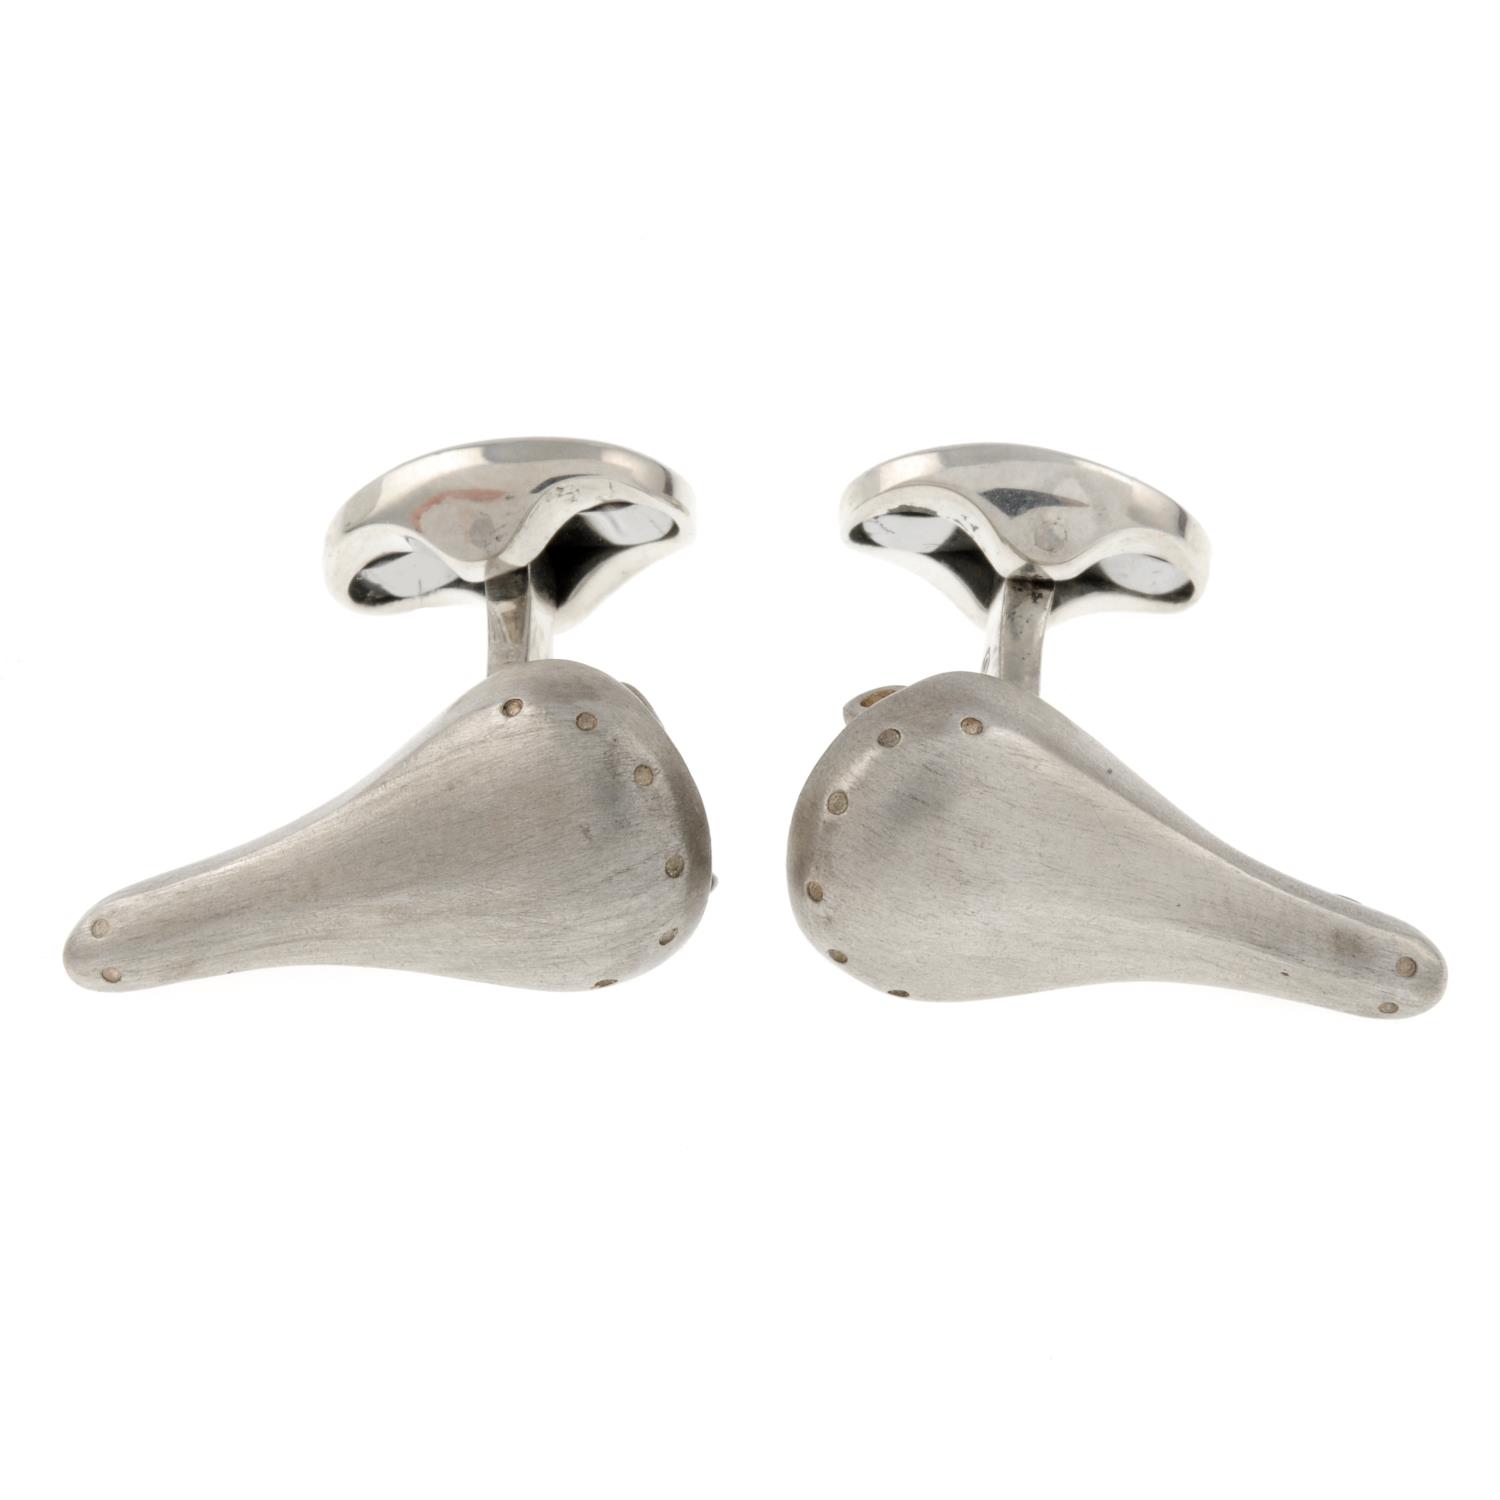 A pair of silver bicycle seat cufflinks, by Deakin and Francis.Signed D&F.